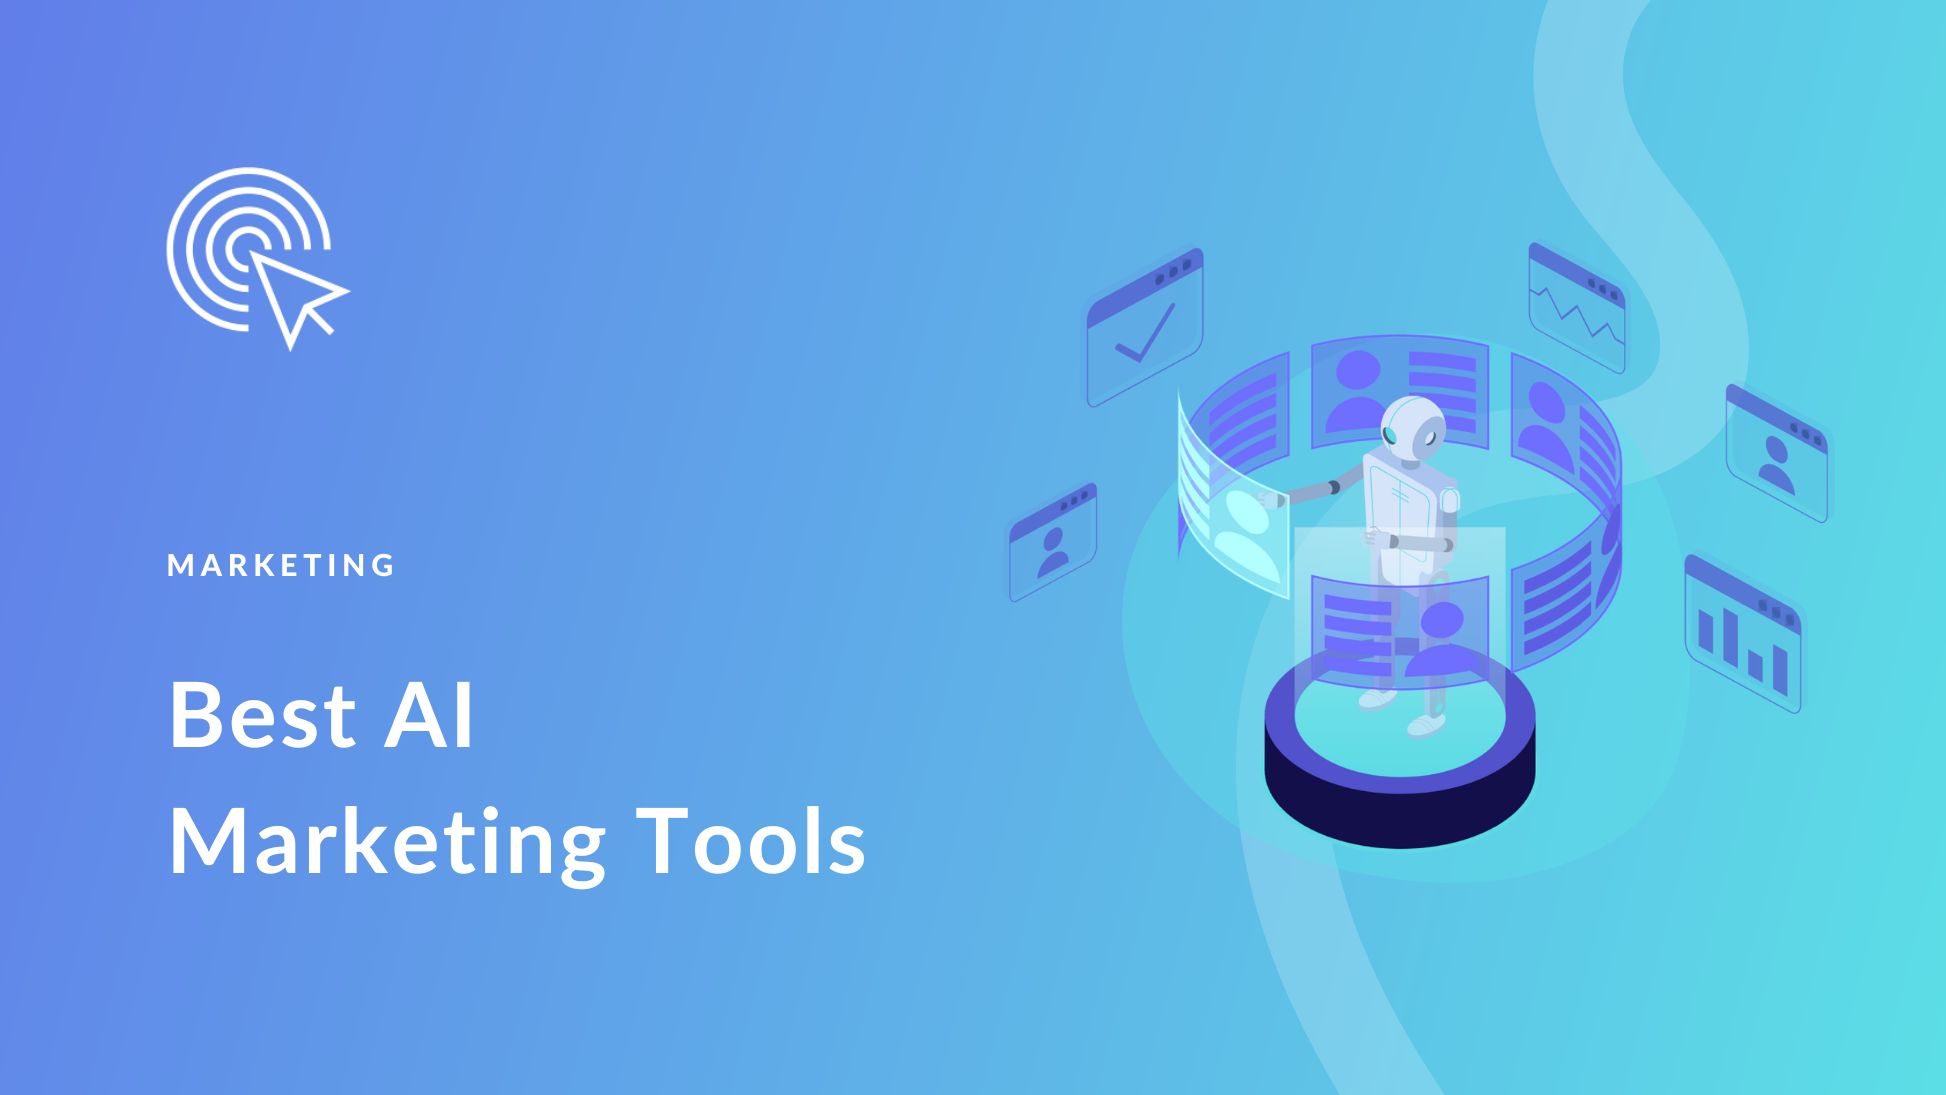 Top 10 Online Marketing Automation Tools for Marketers